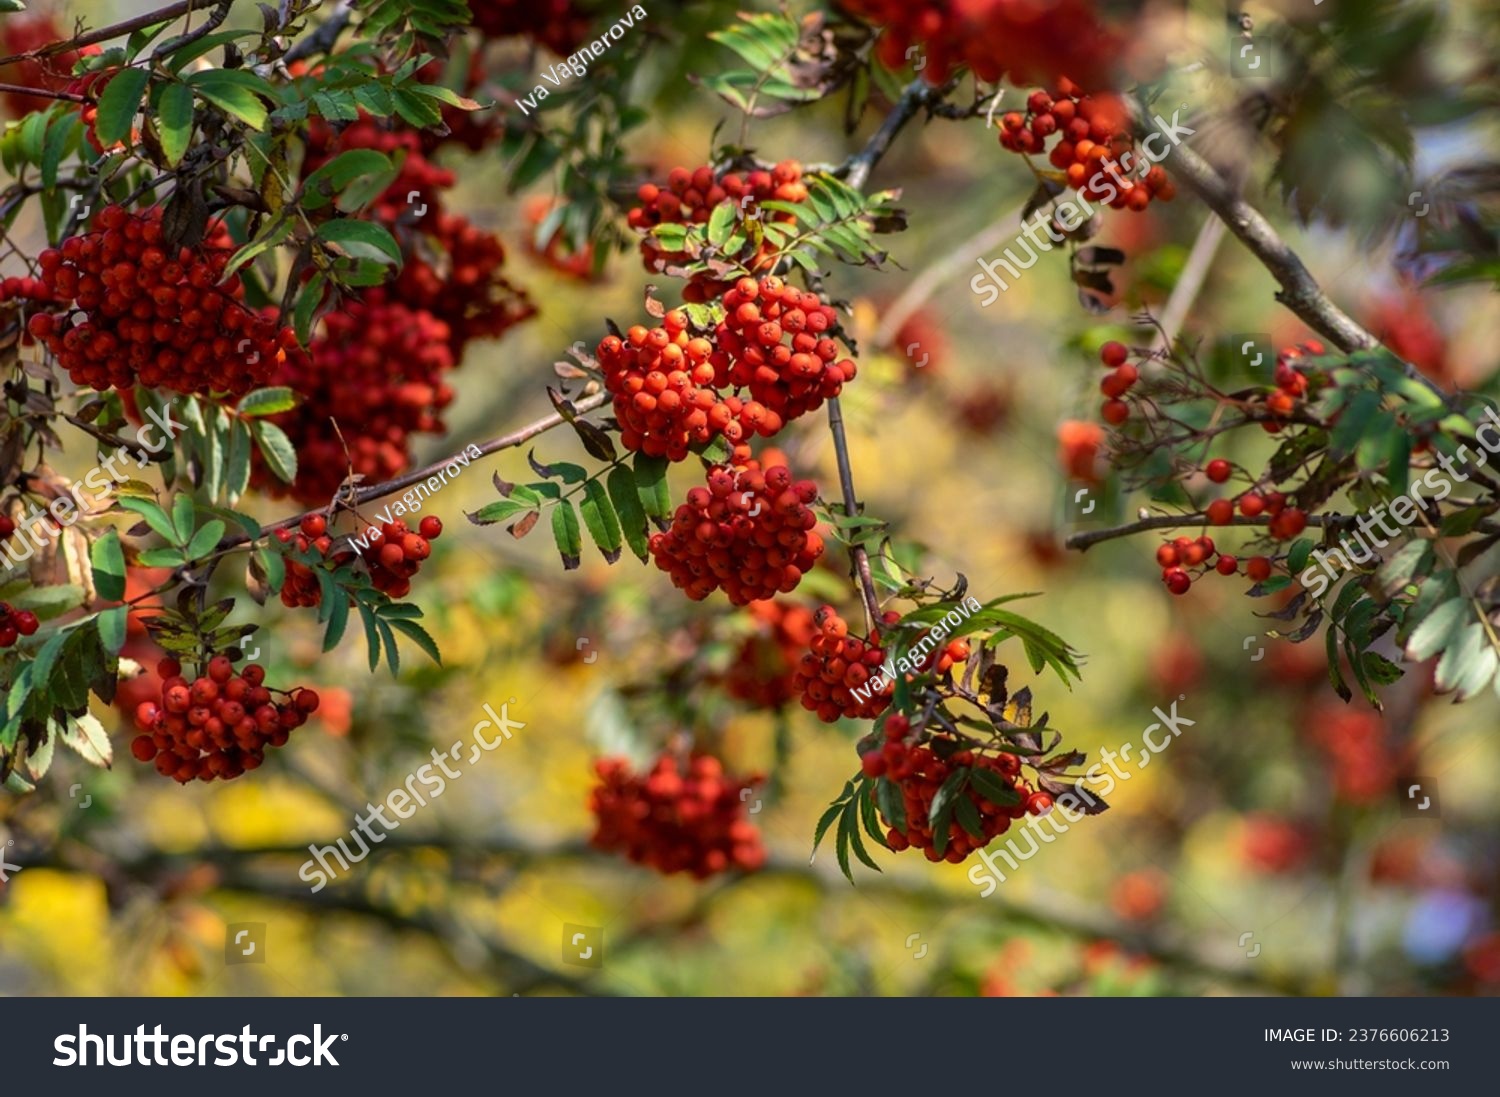 Sorbus aucuparia moutain-ash rowan tree branches with green leaves and red pomes berries on branches, blue sky #2376606213